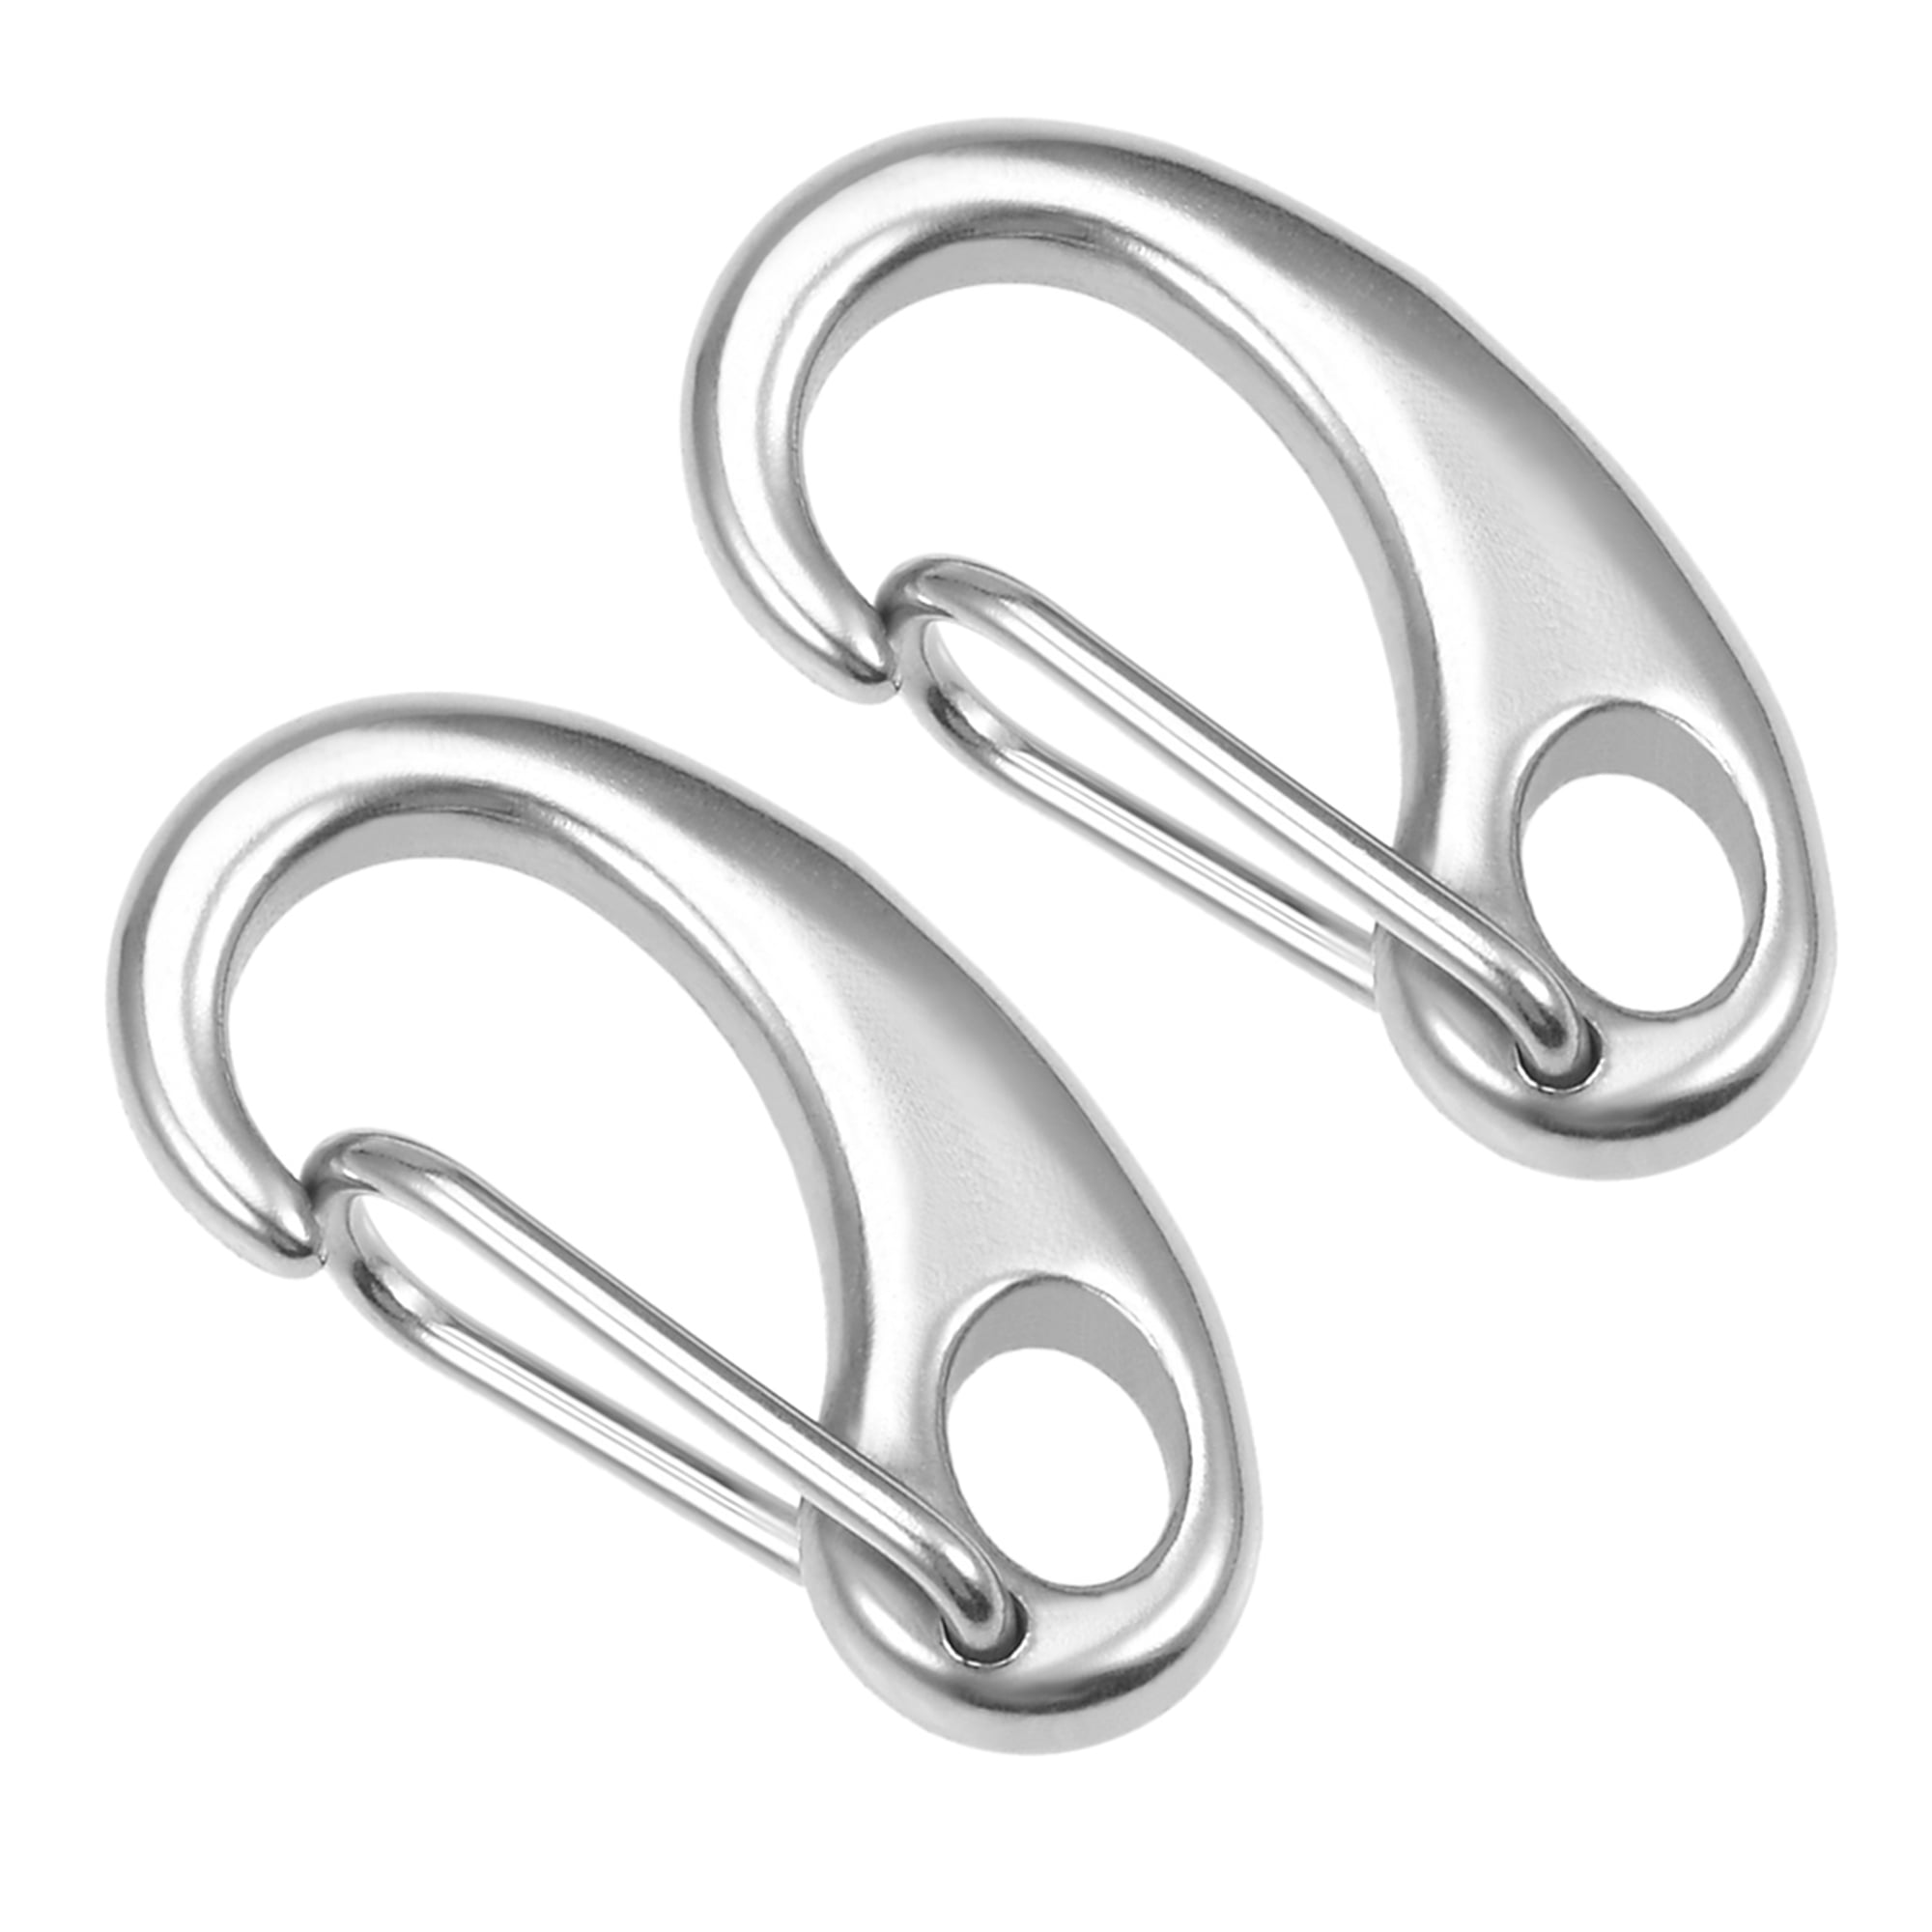 5 PC 2'' Stainless Steel 316 Gate Snap Hook  Carabiner Boat Rigging 400 Lbs 